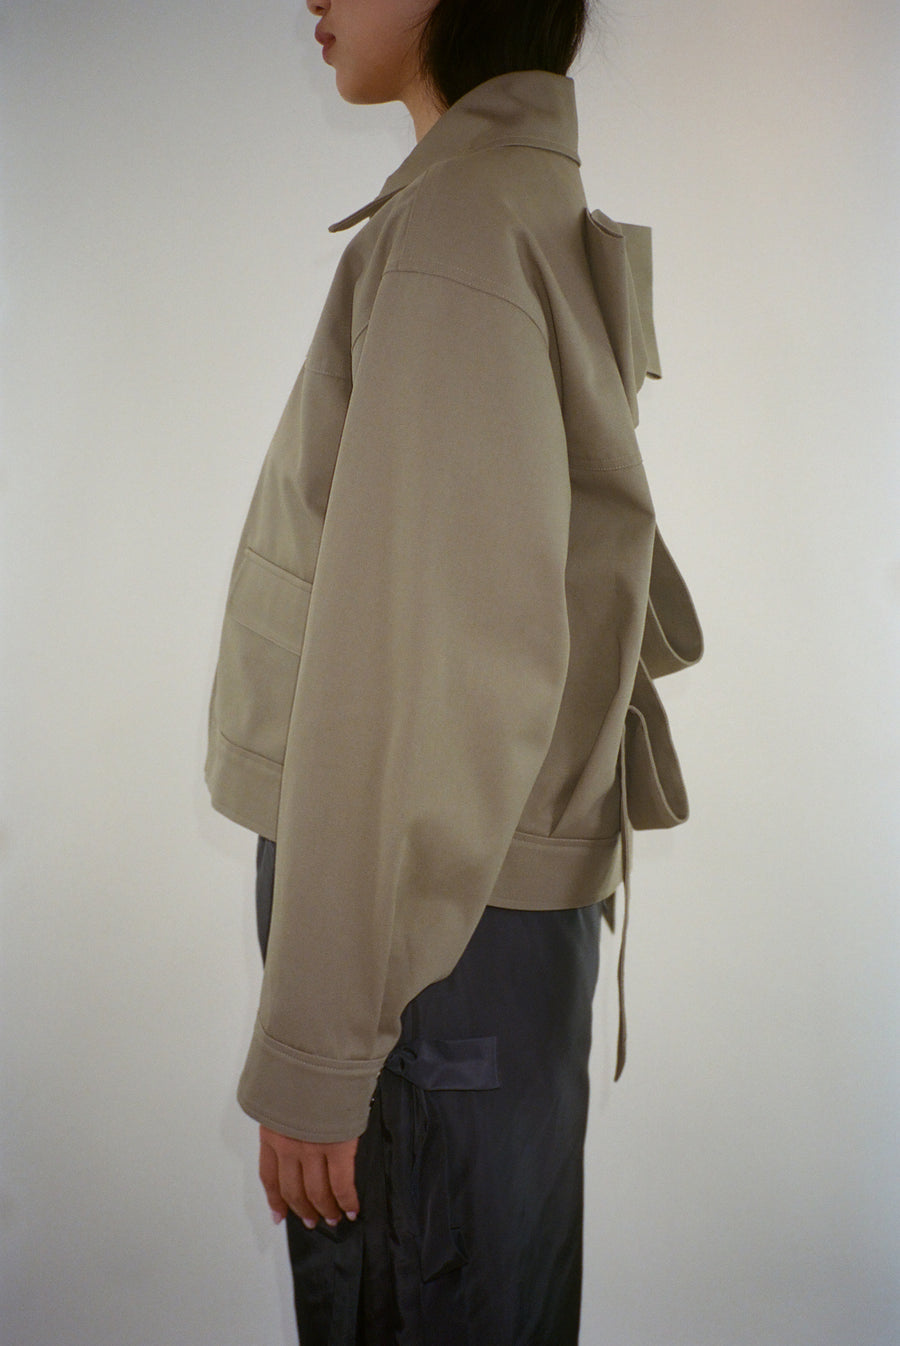 Spread collar jacket in taupe with oversized bow at back on model